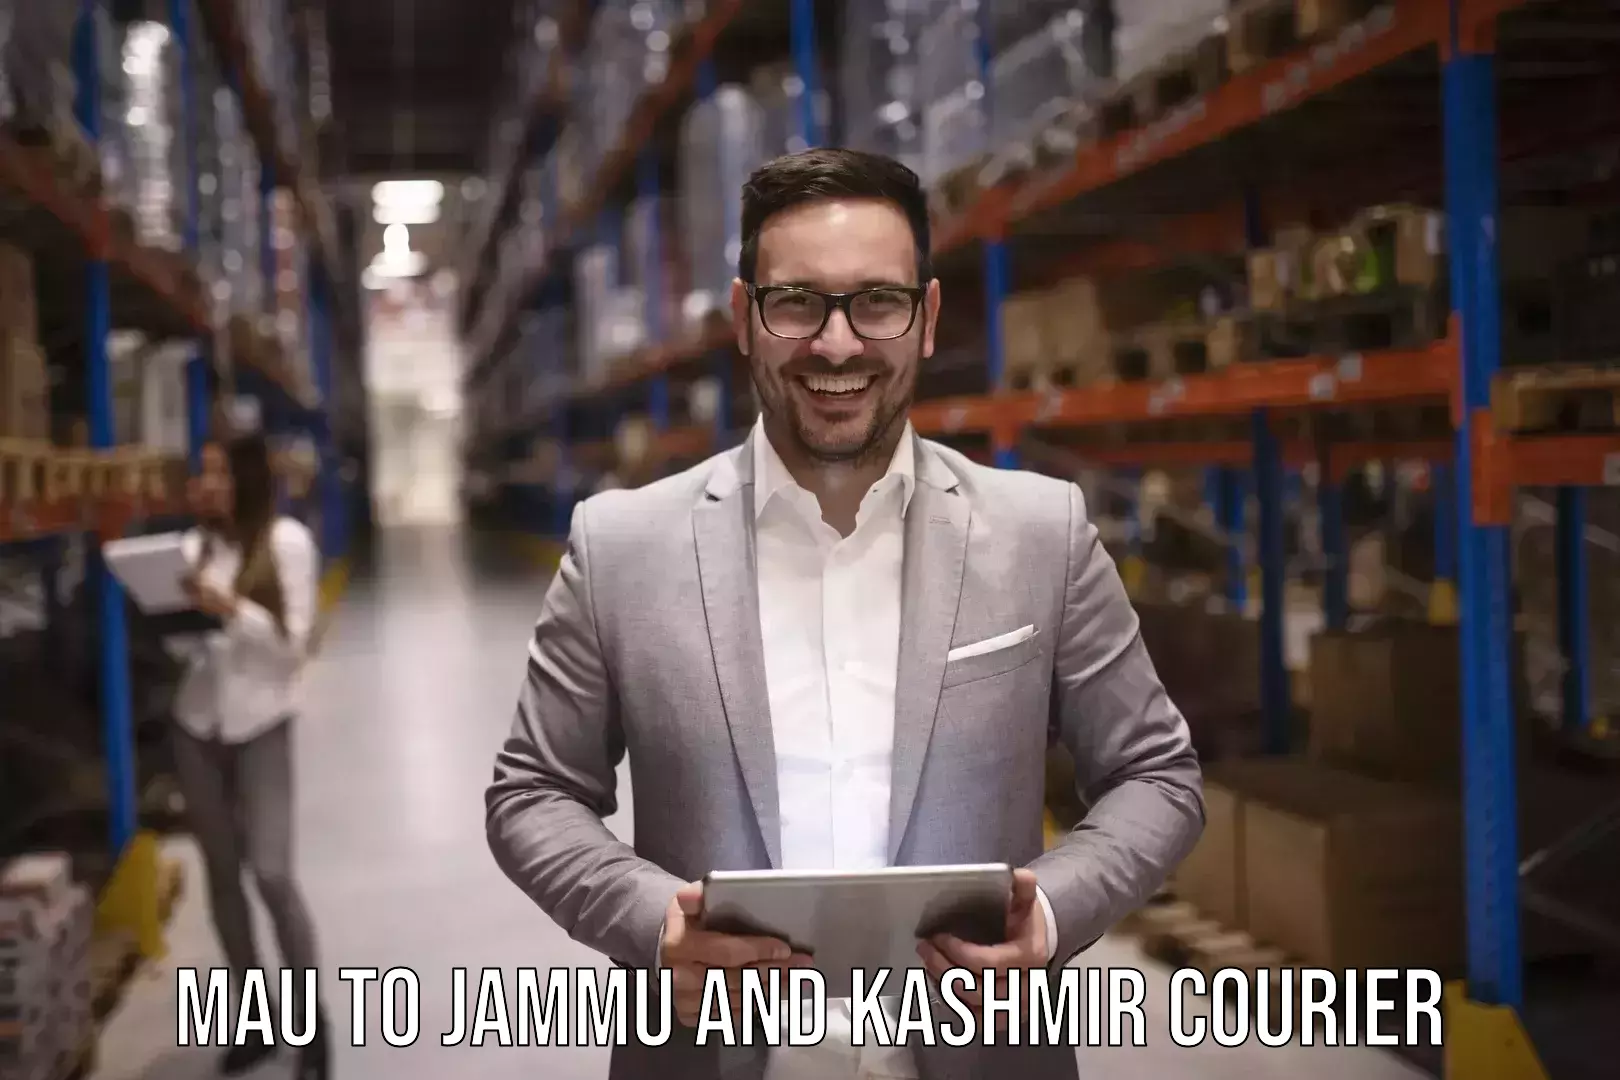 Luggage delivery network Mau to Jammu and Kashmir